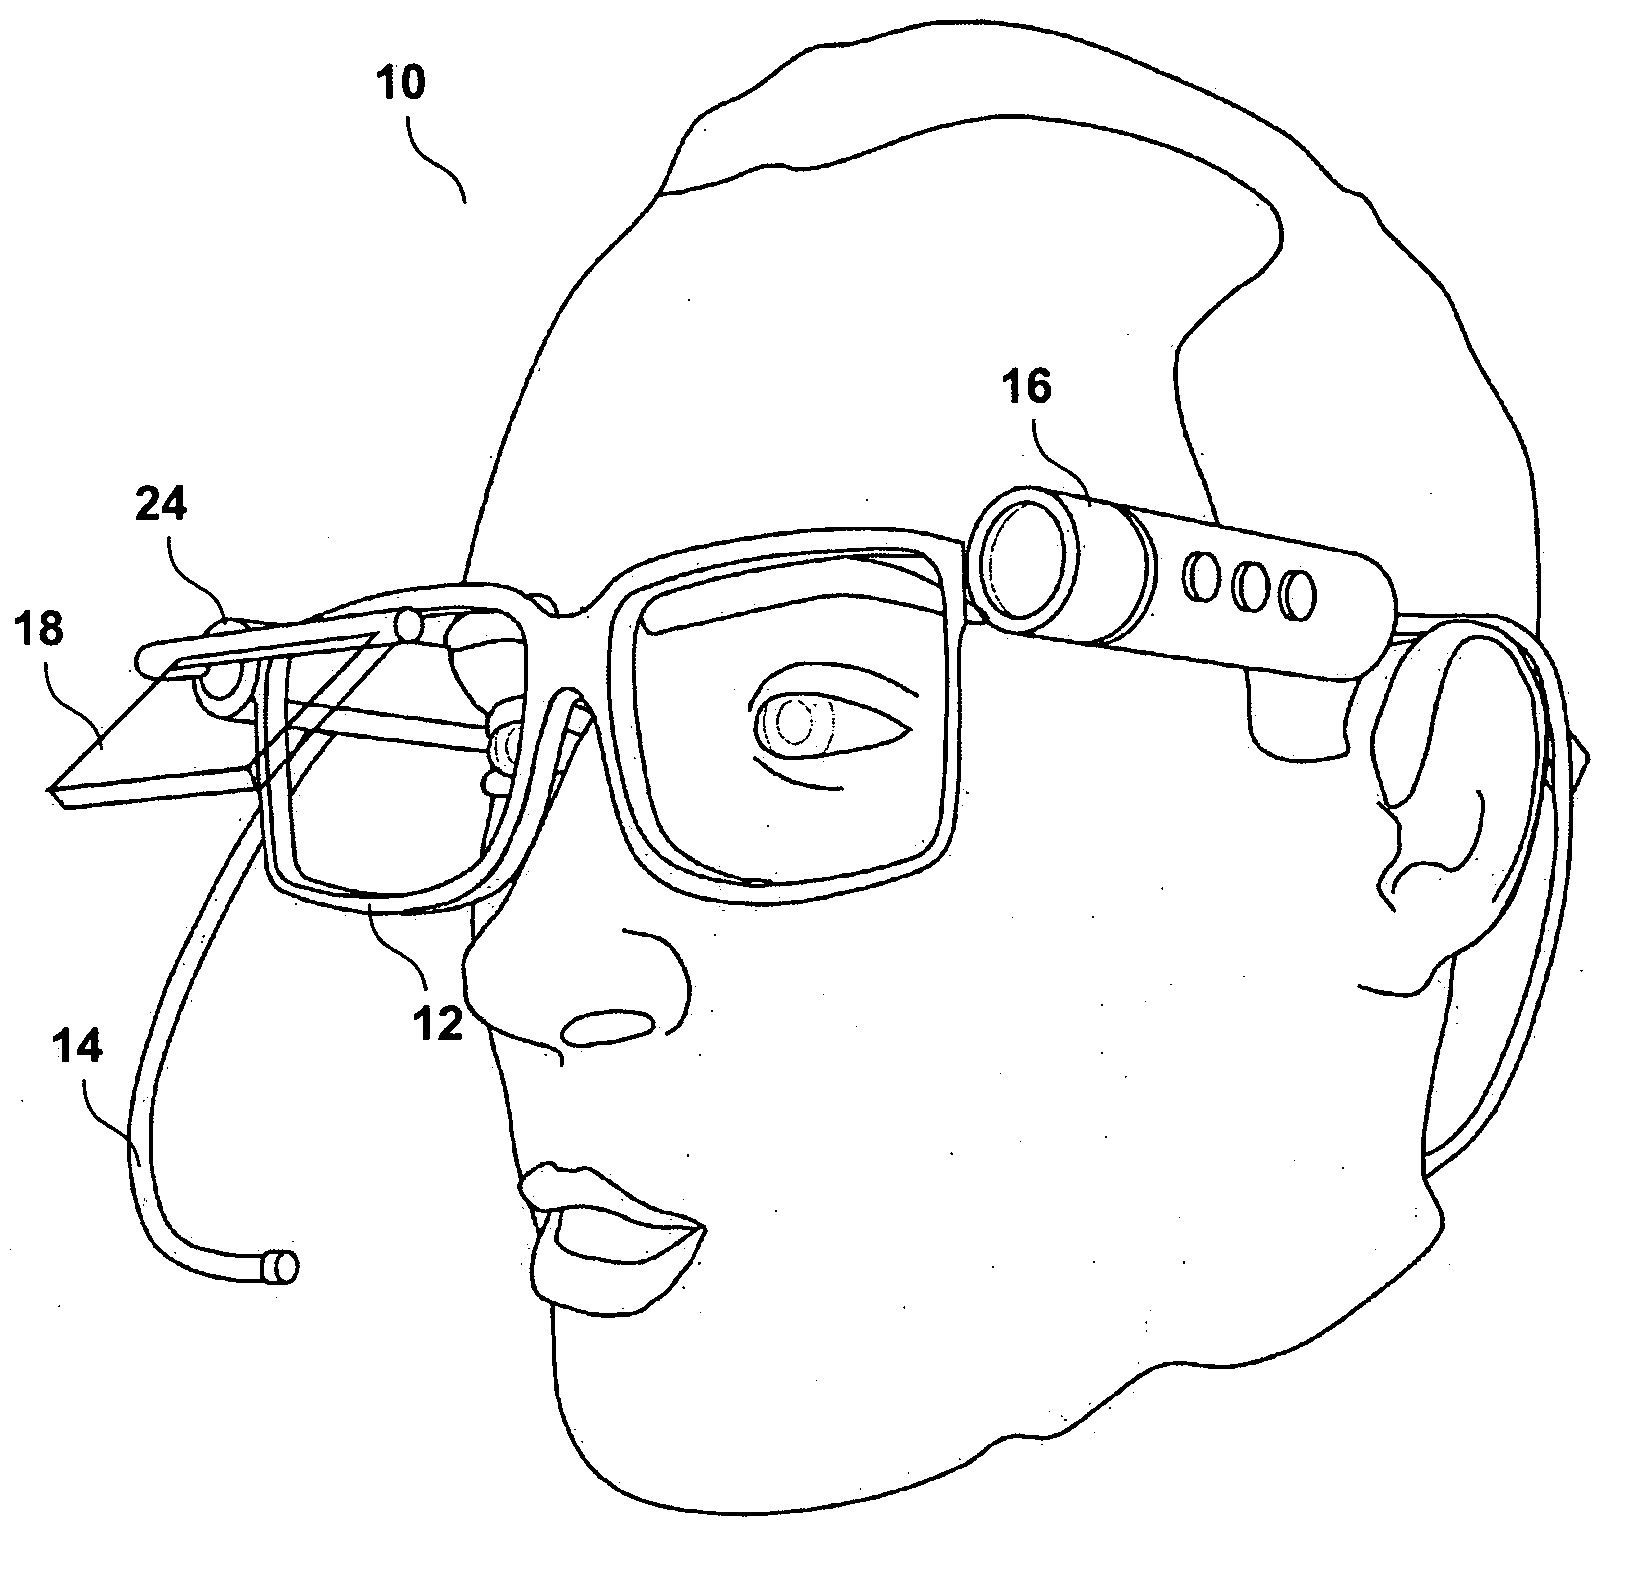 Hands-free data acquisition system